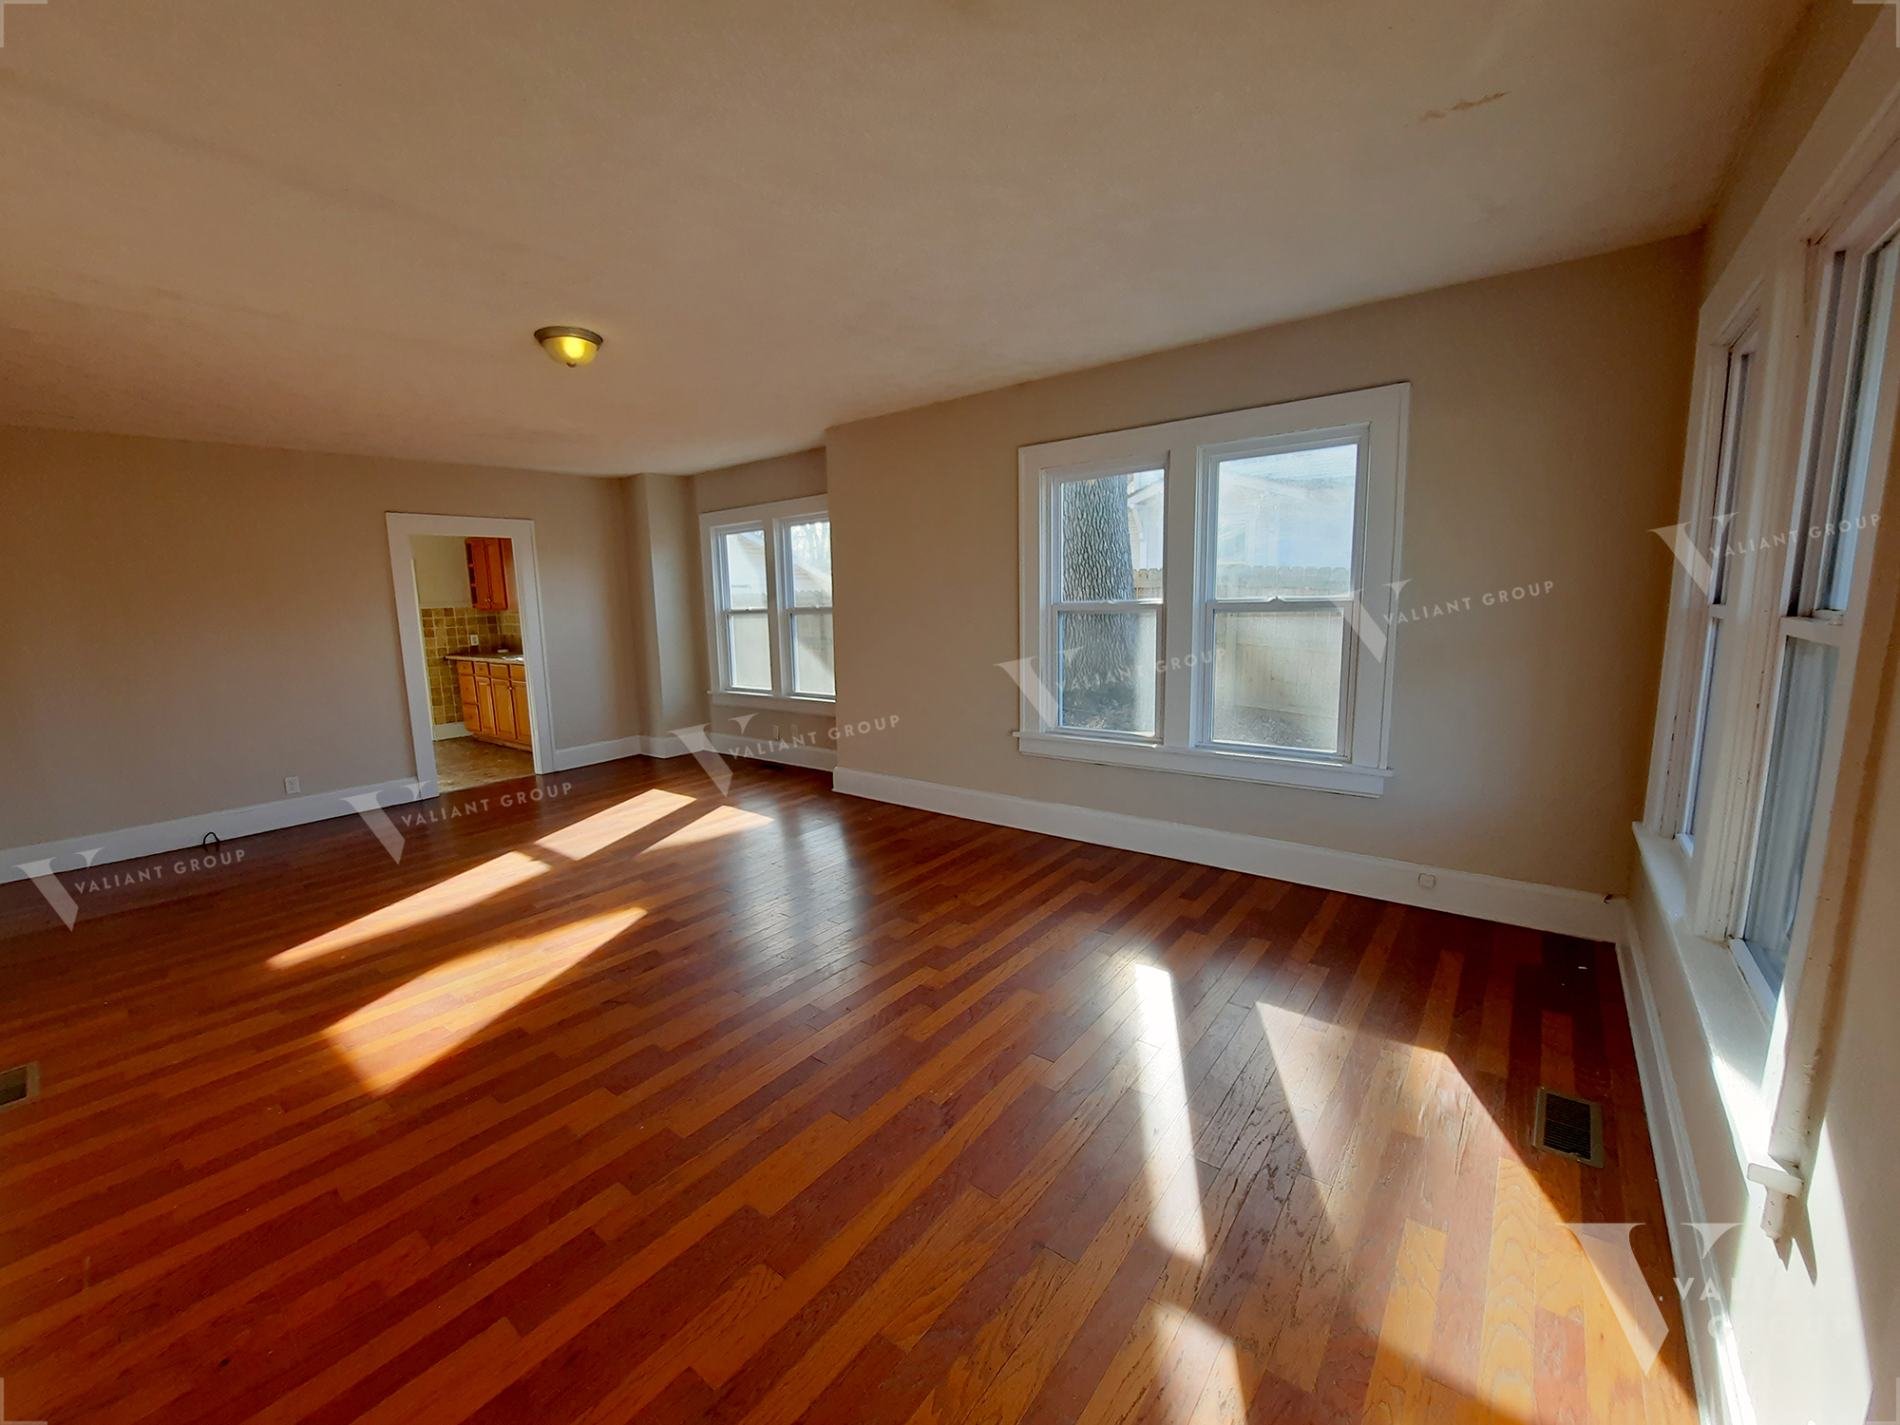 House-For-Rent-1012-S-Fort-Ave-Springfield-MO-02-Living-Room.jpg